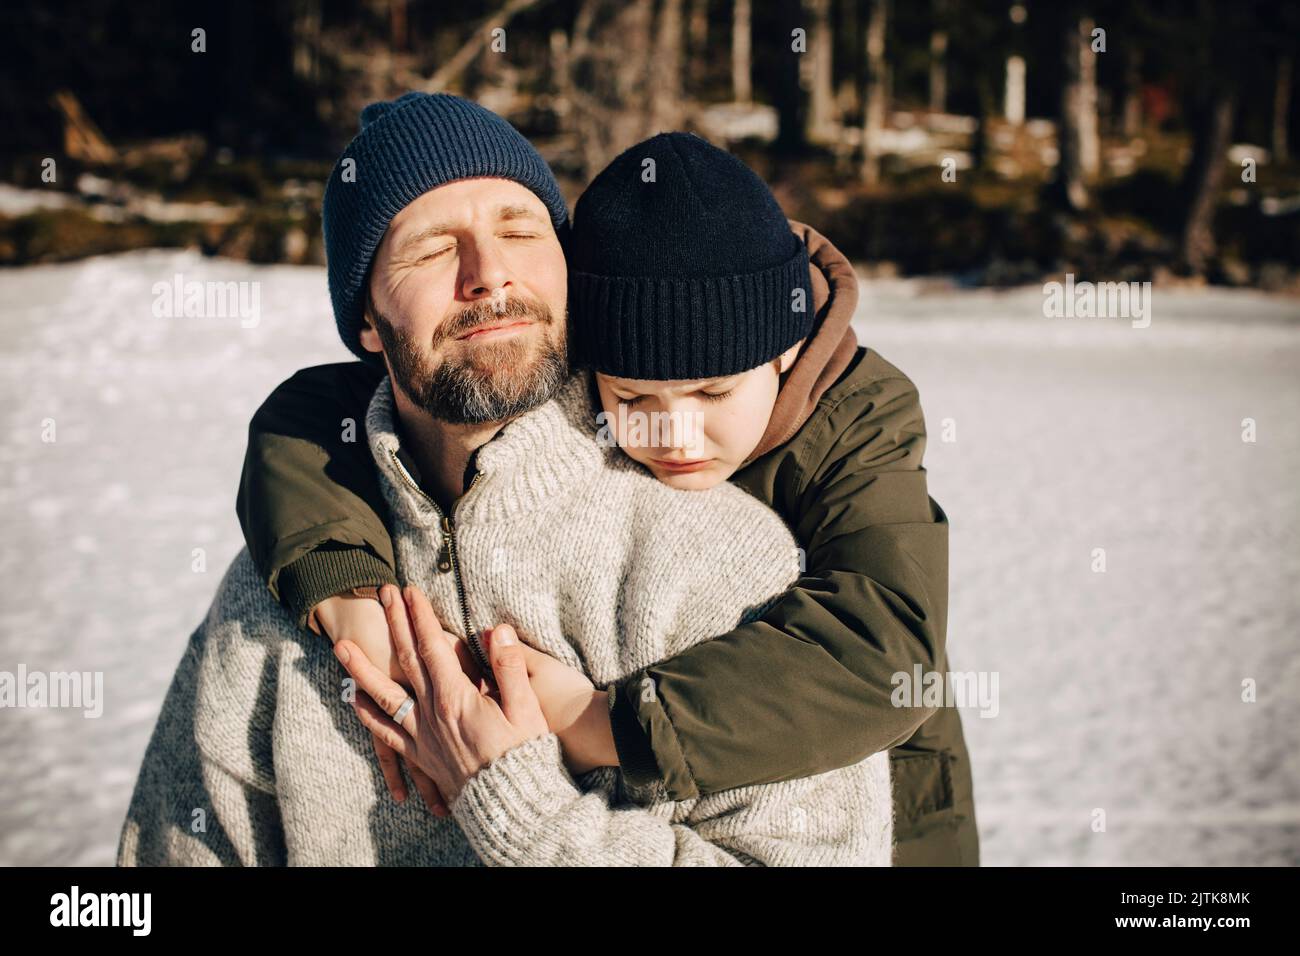 Boy in warm clothing hugging father with eyes closed during sunny day in winter Stock Photo